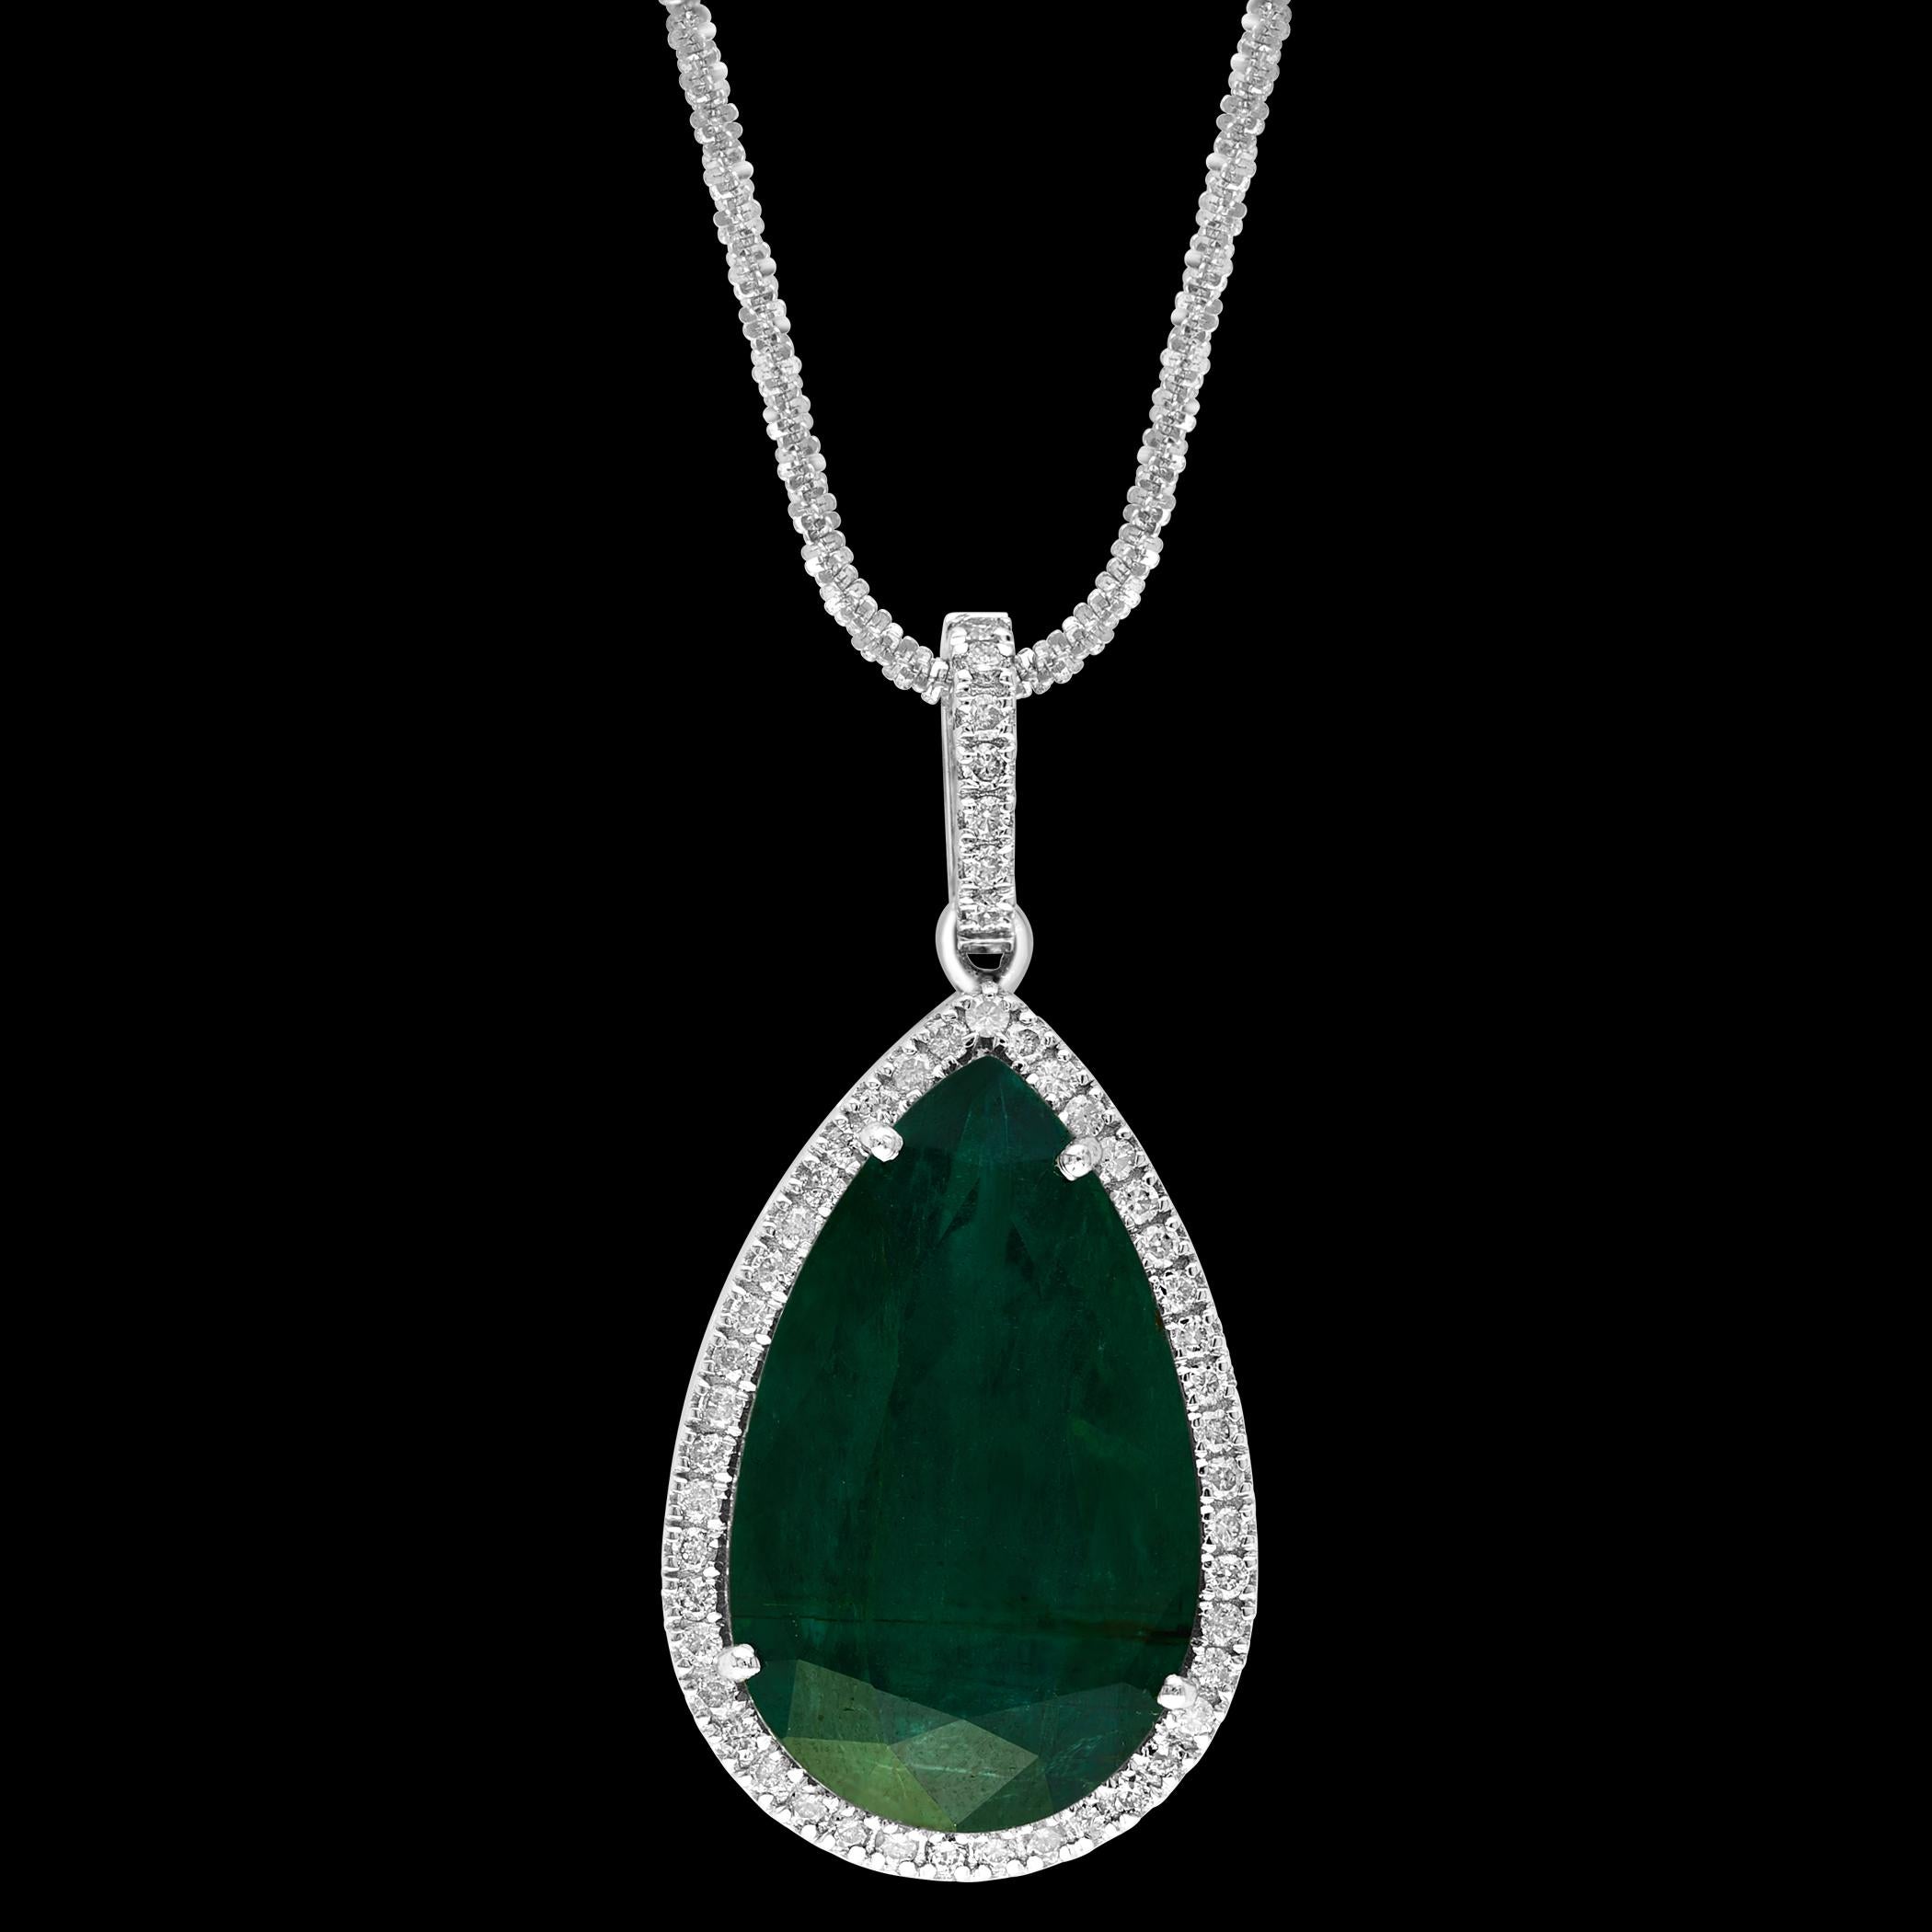 19 Ct Pear Cut Emerald & 1 Ct Diamond Halo Pendent/Necklace 14 KW Gold Chain For Sale 11